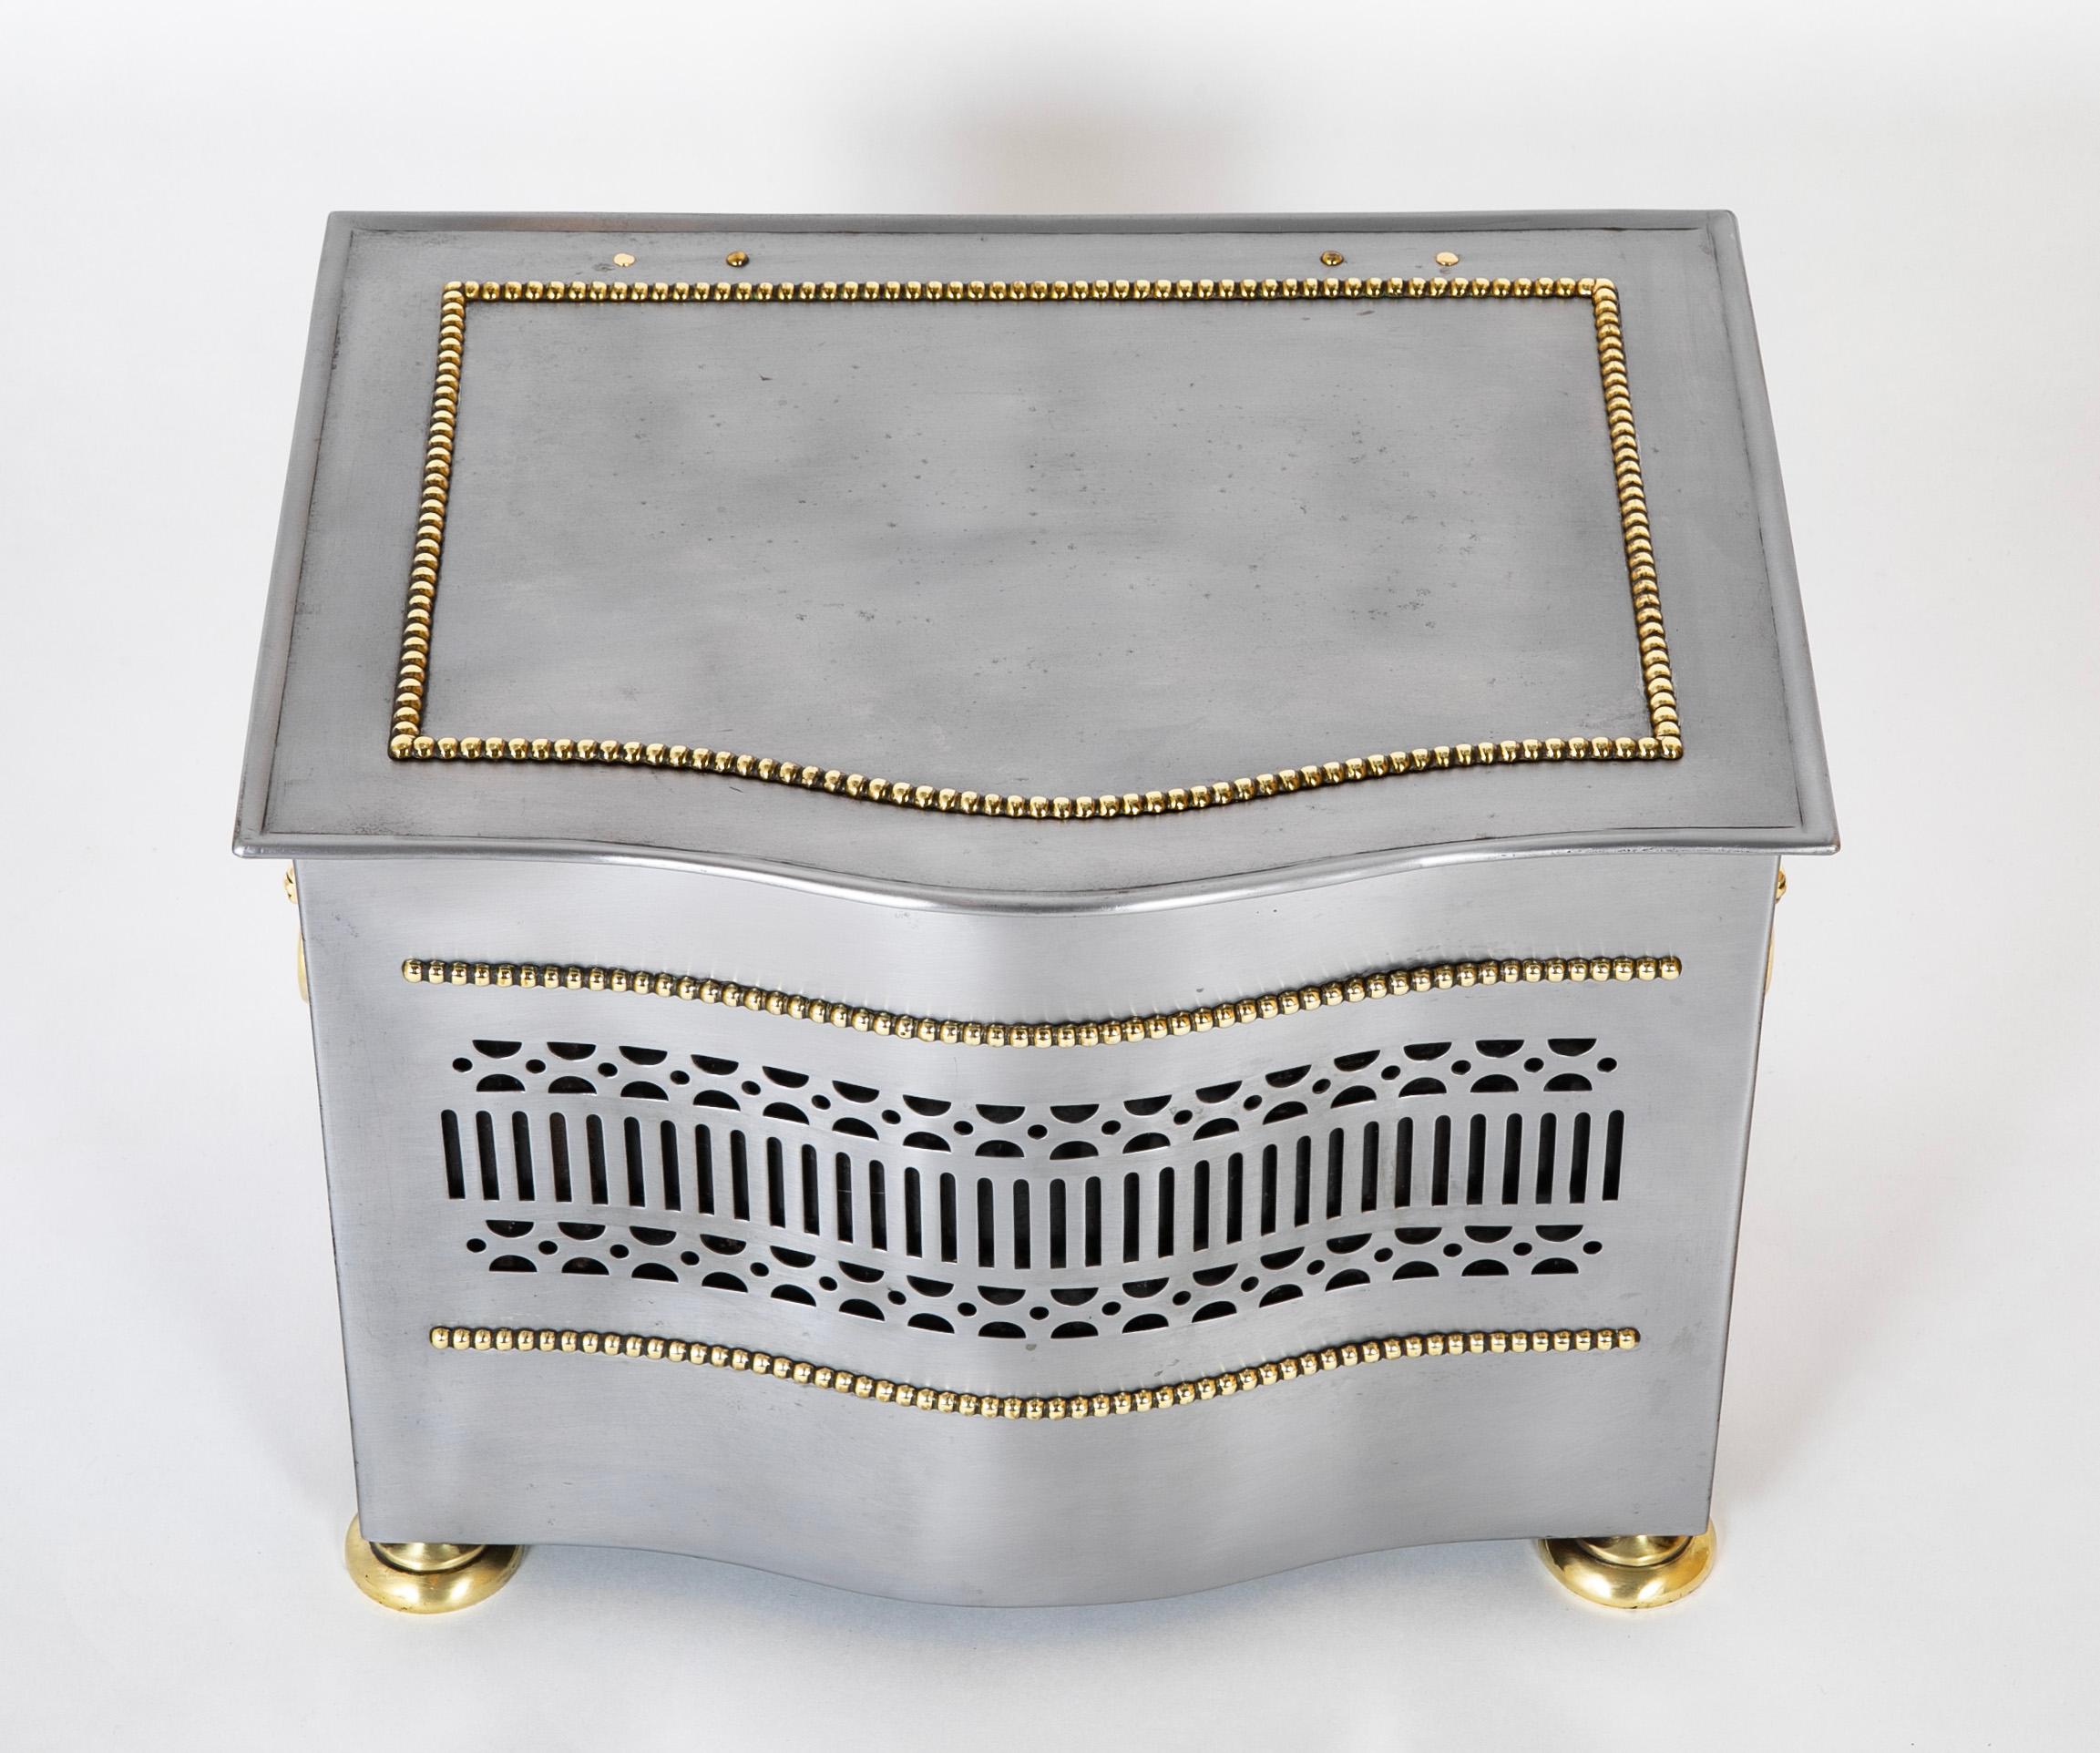 Unusual and very handsome brushed steel and polished brass tinder box. This box has a removable tin liner that would have been used to fill with hot coals and used as a portable heater. When not is use it was for storing kindling by the fireplace.